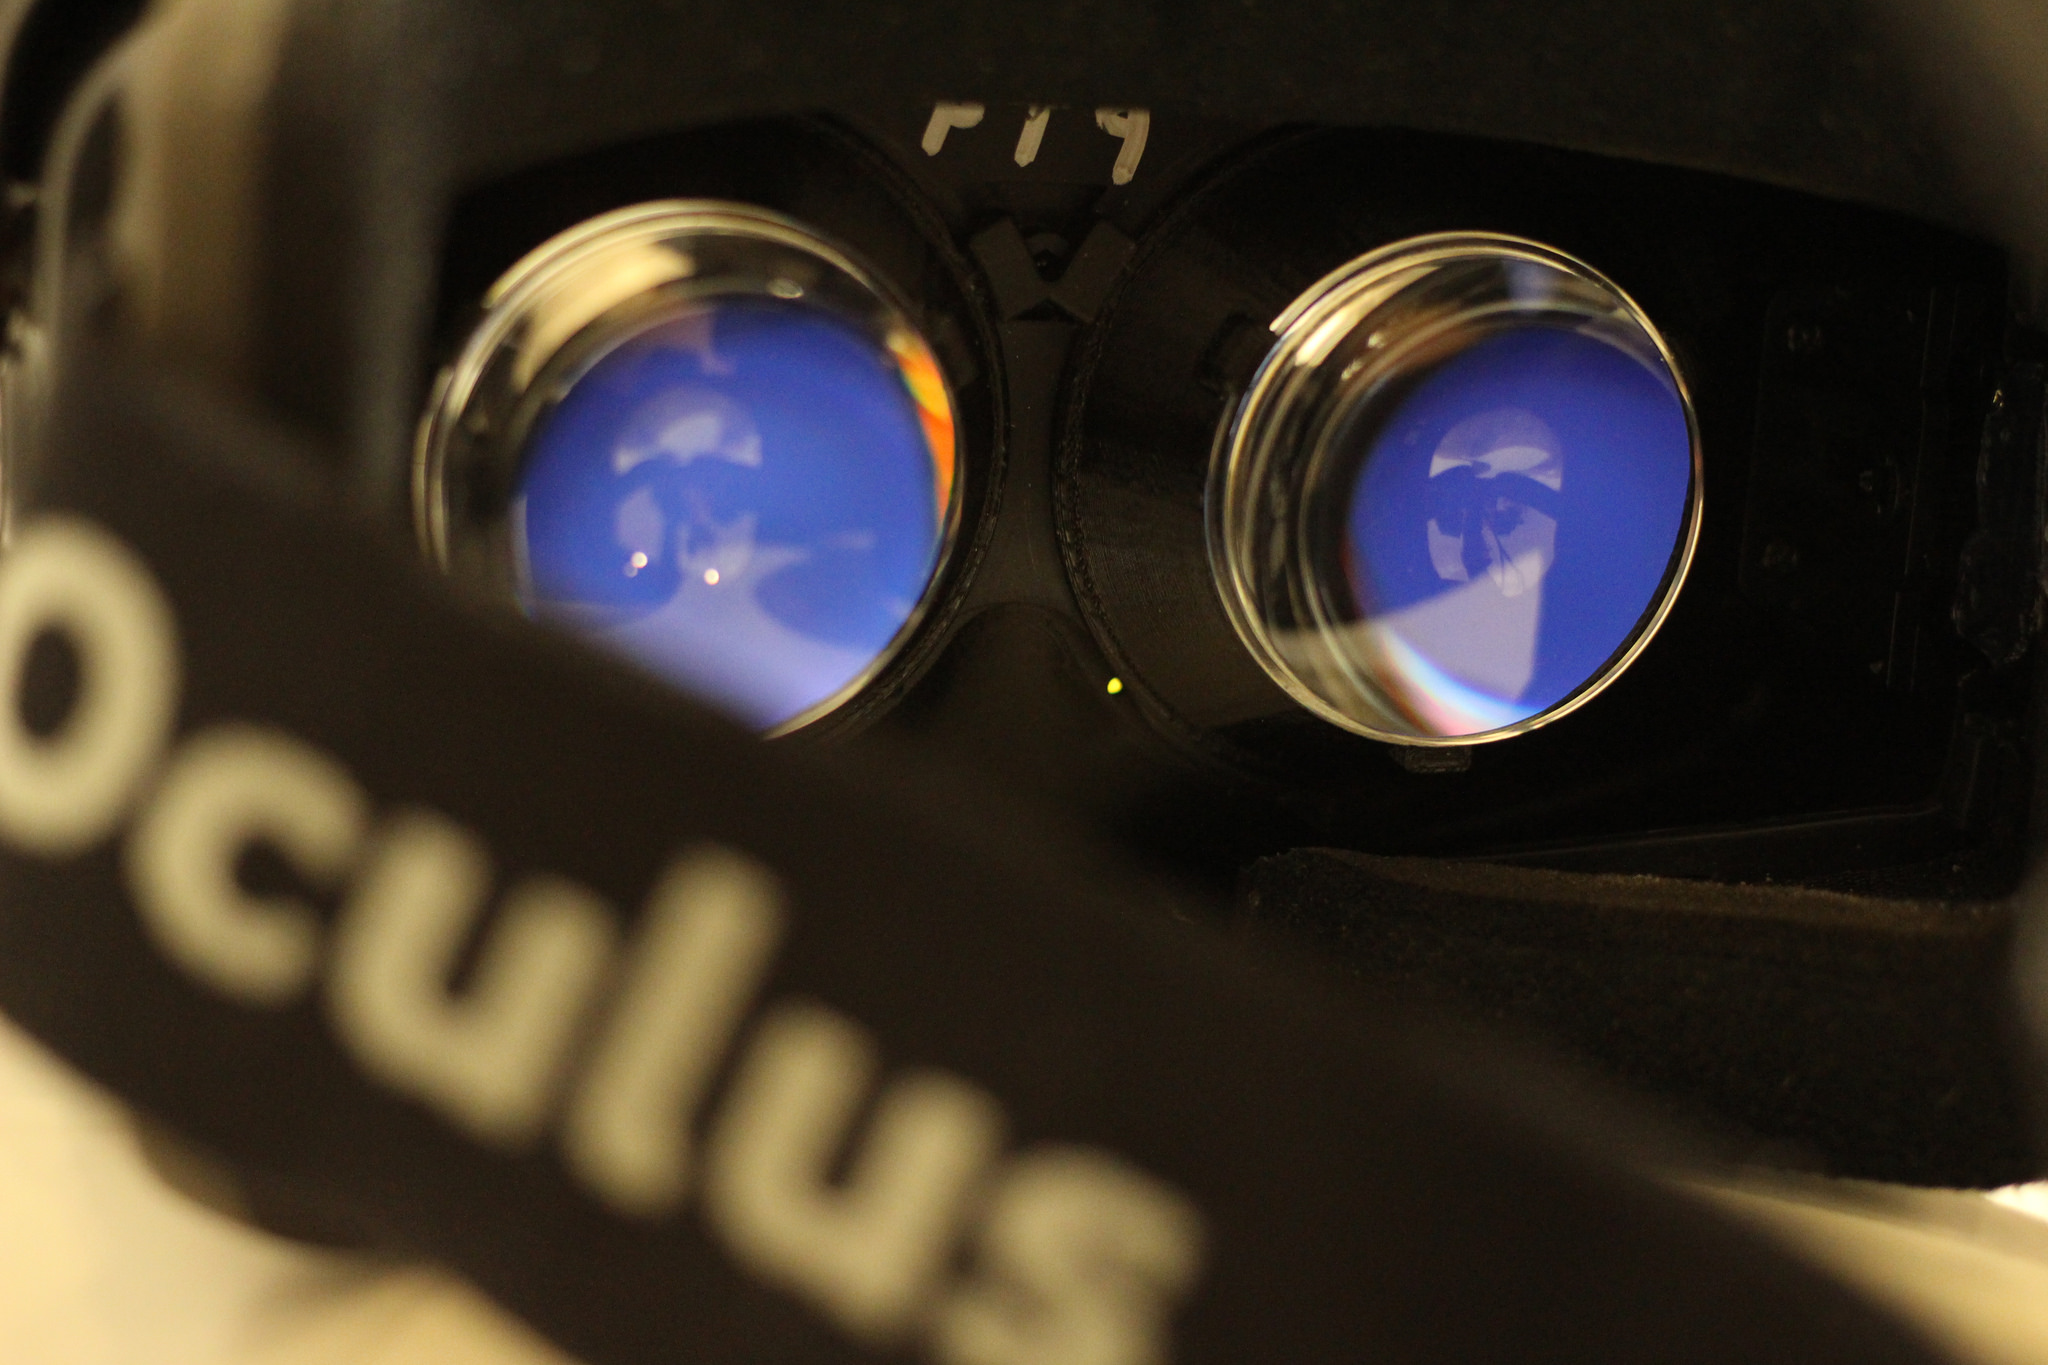 Oculus Rift is heading to the mainstream soon, thanks to massive financial backing from Facebook.